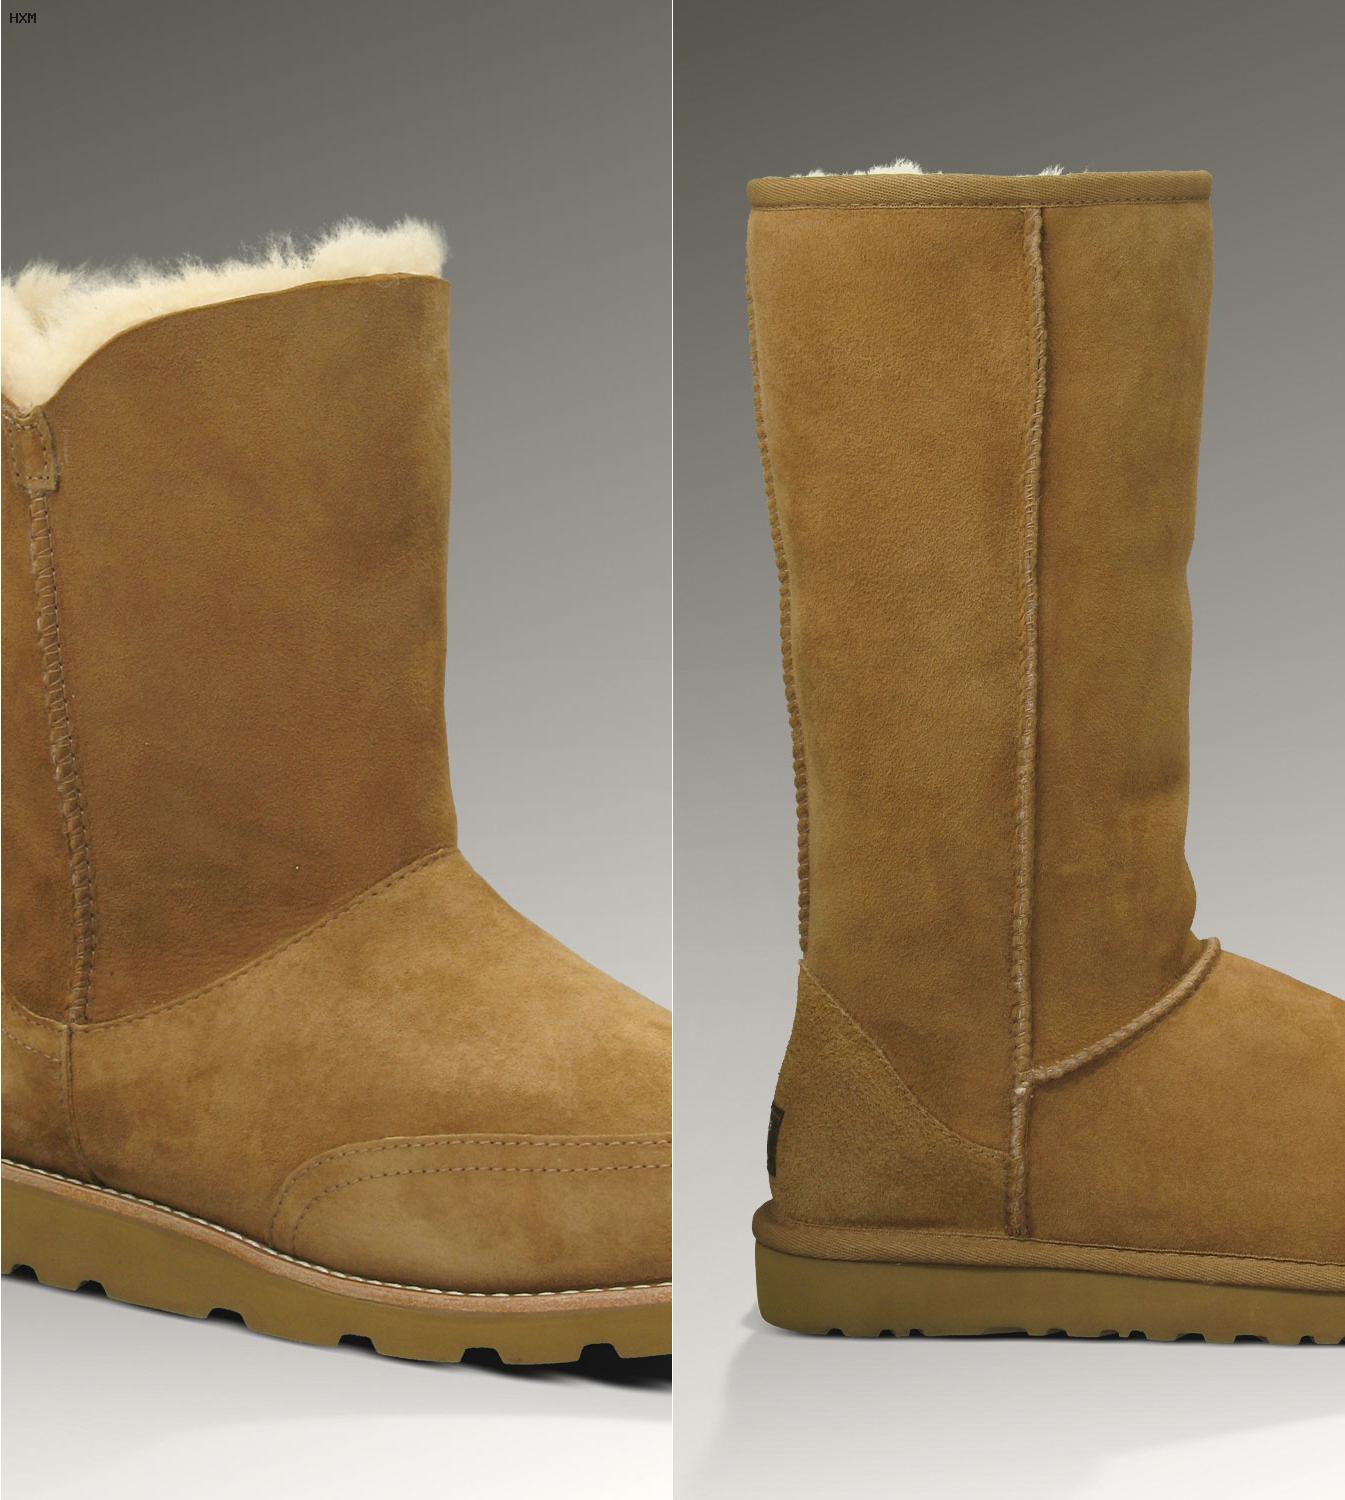 copy uggs manchester